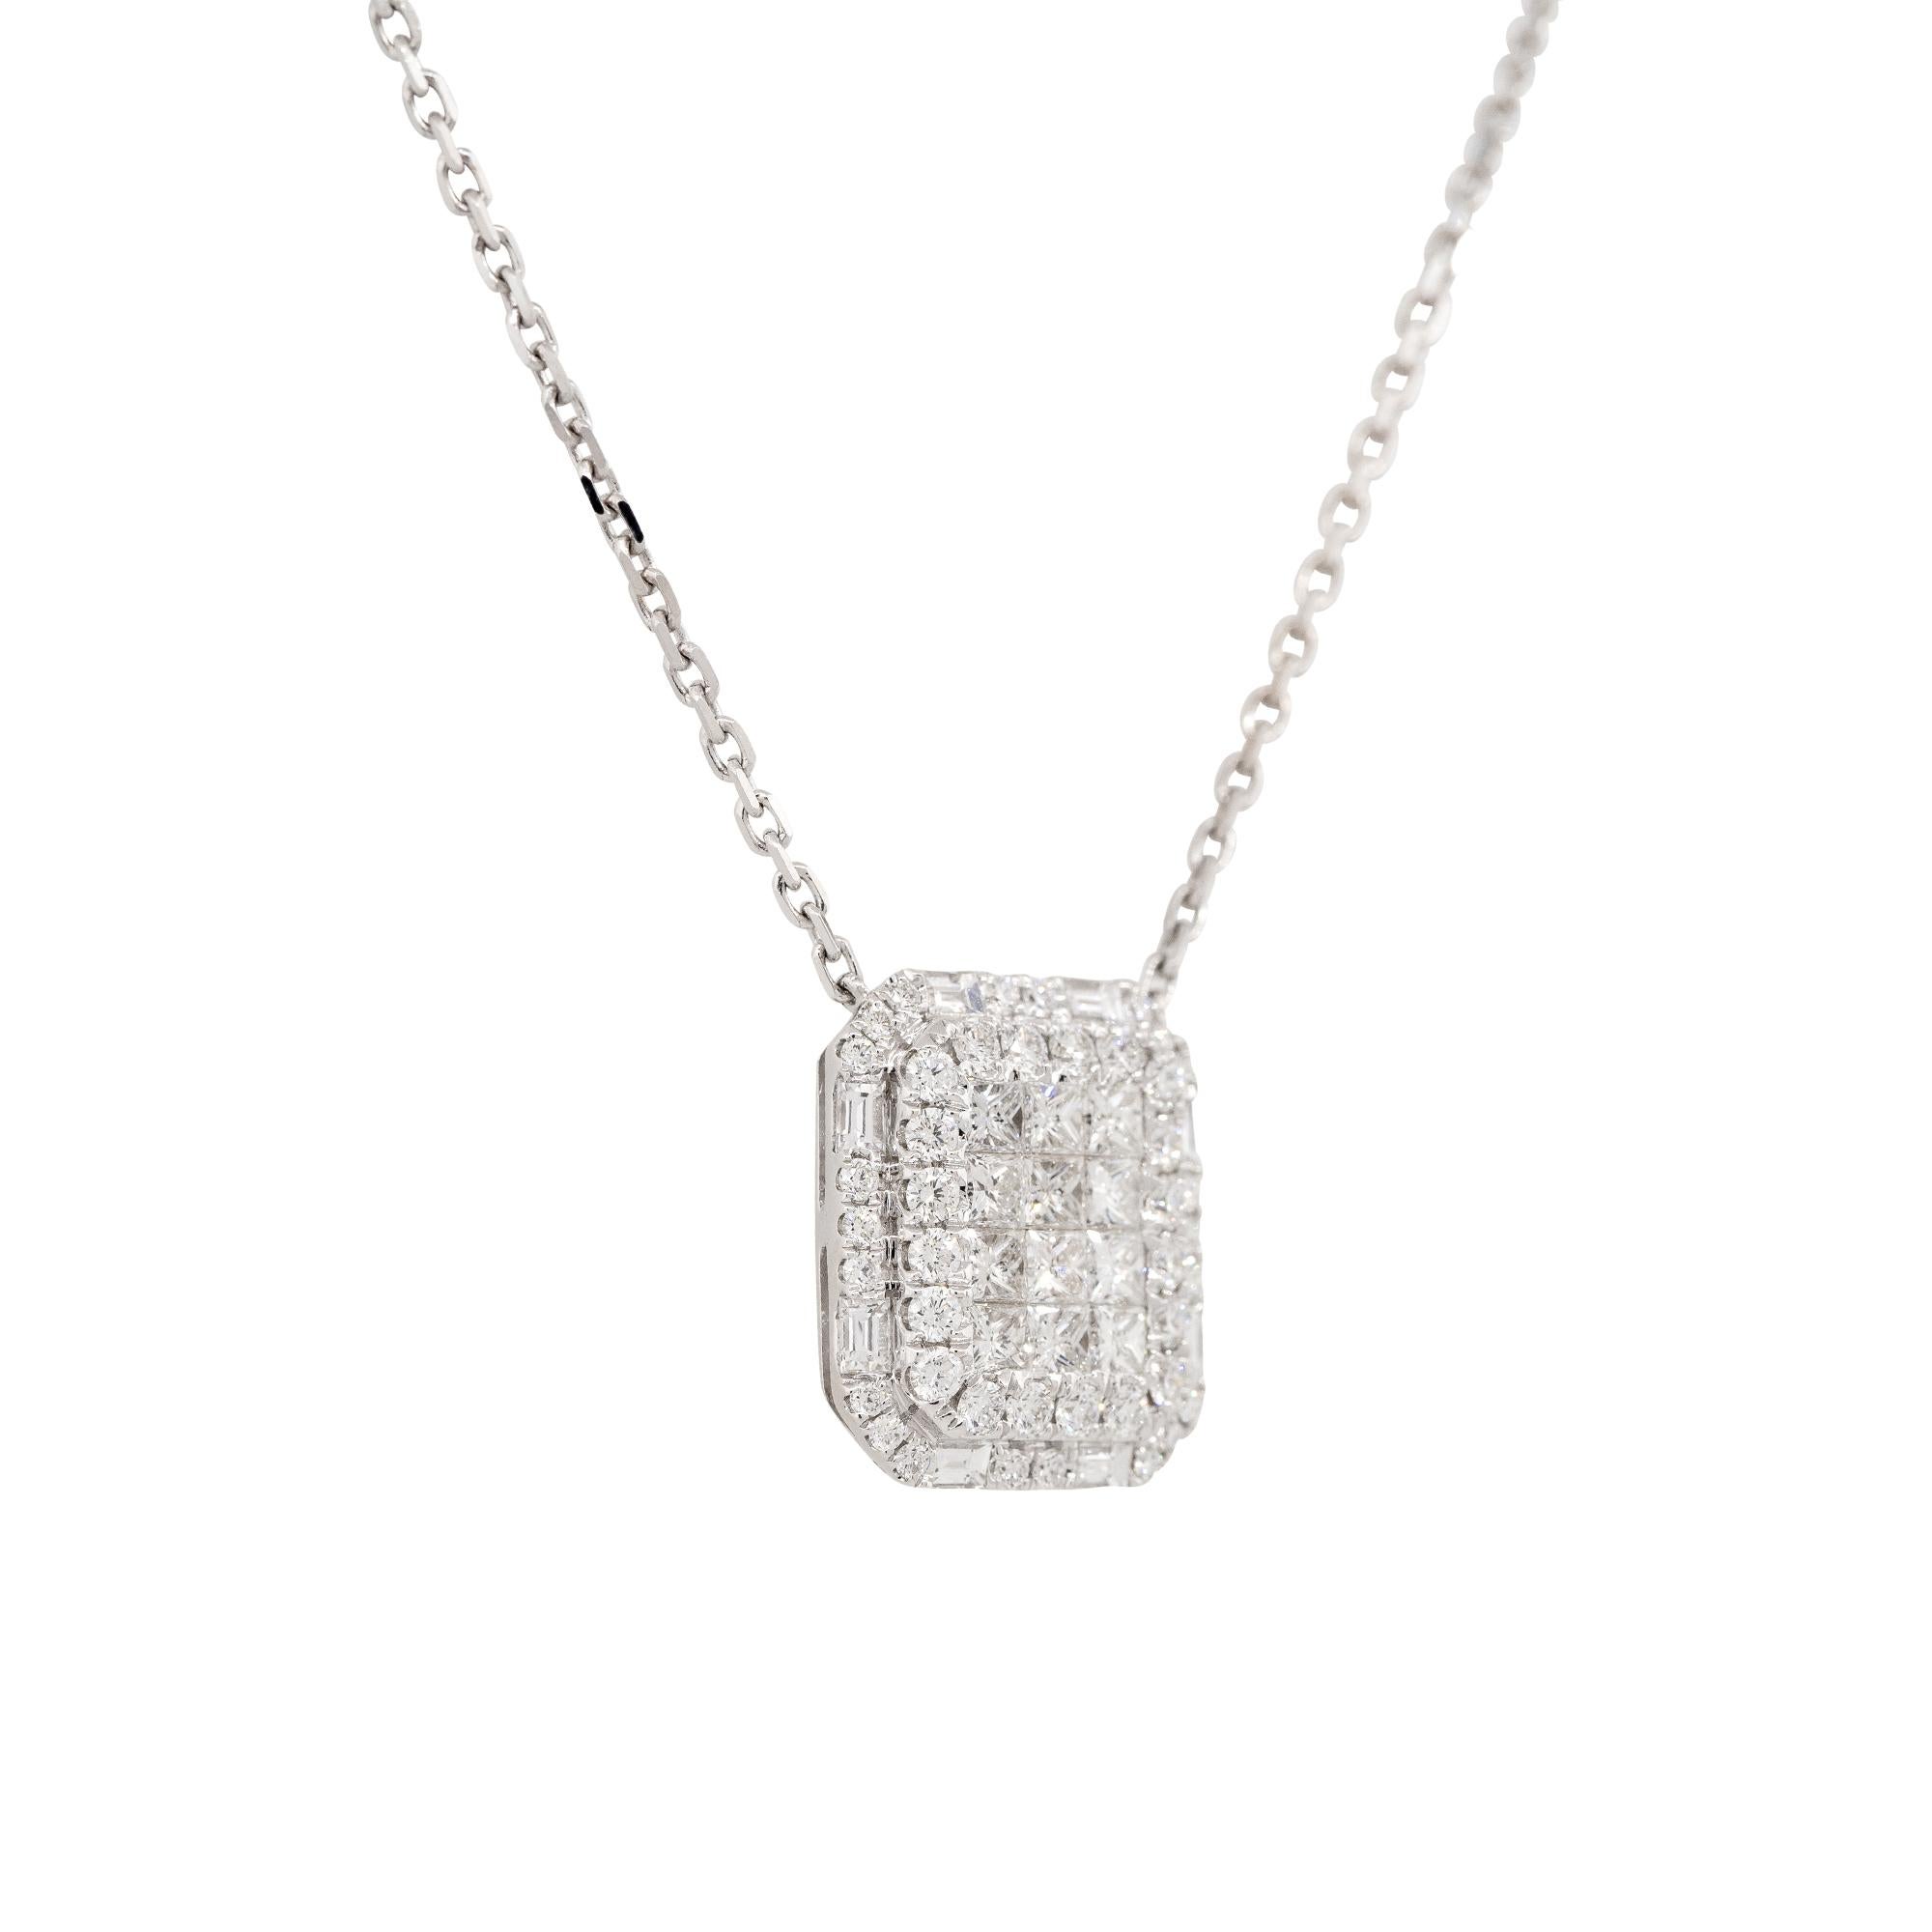 2.43 Carat Pave Diamond Rectangular Shape Necklace 18 Karat In Stock In Excellent Condition For Sale In Boca Raton, FL